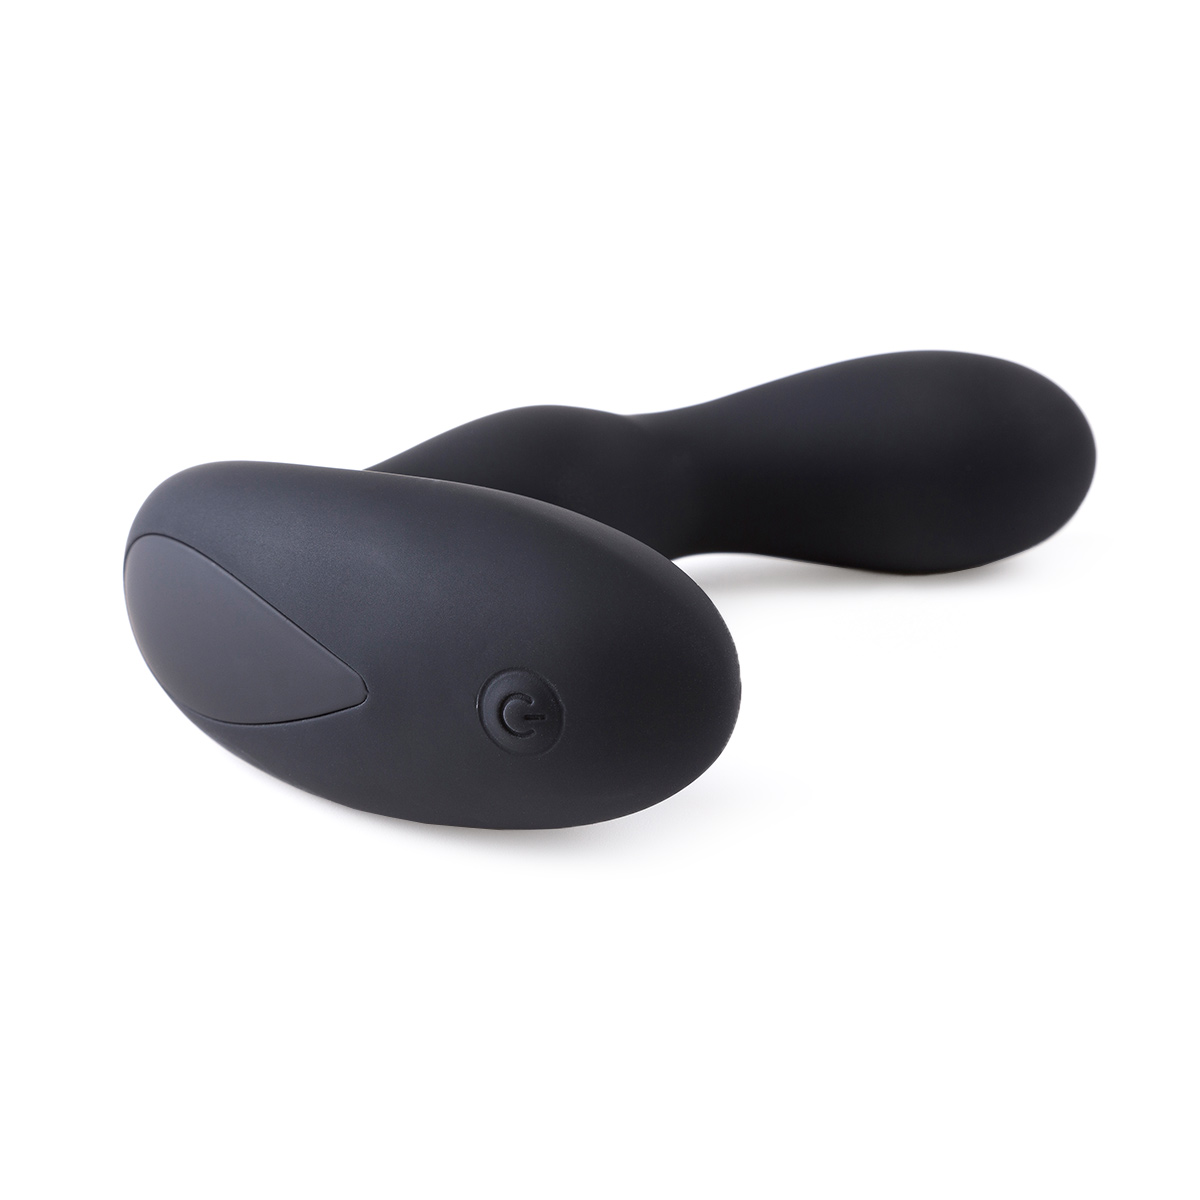 Moving-Prostate-Massager-with-Remote-P1-OPR-3090098-2